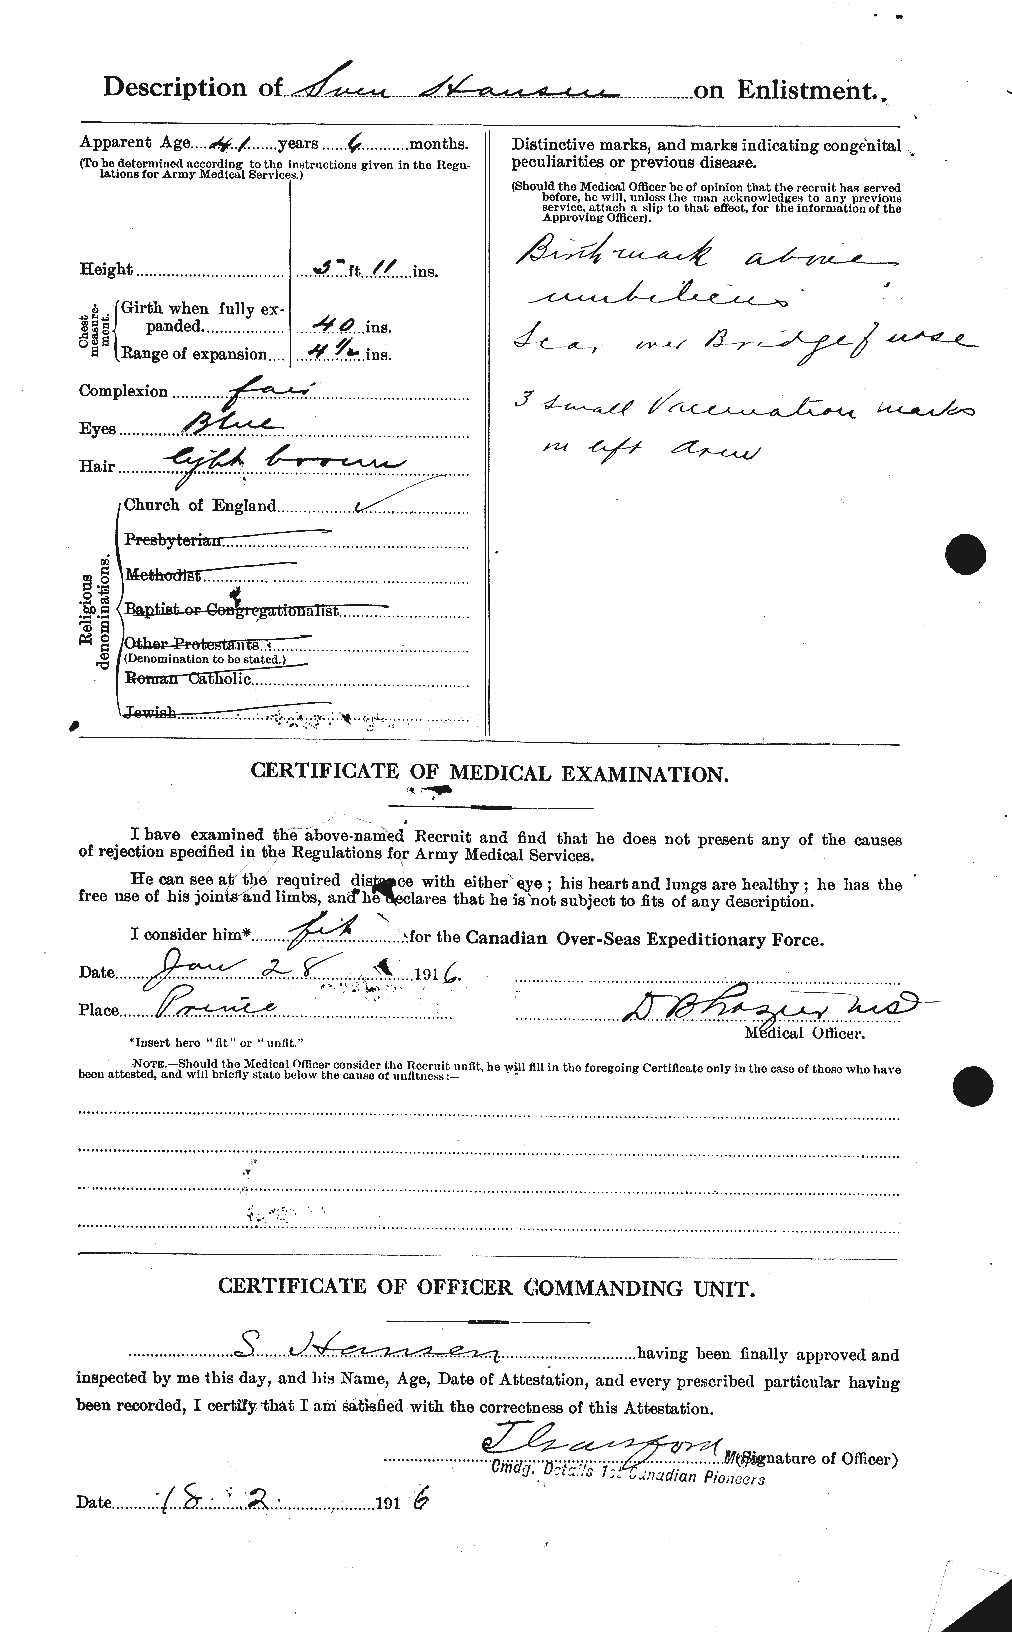 Personnel Records of the First World War - CEF 384681b